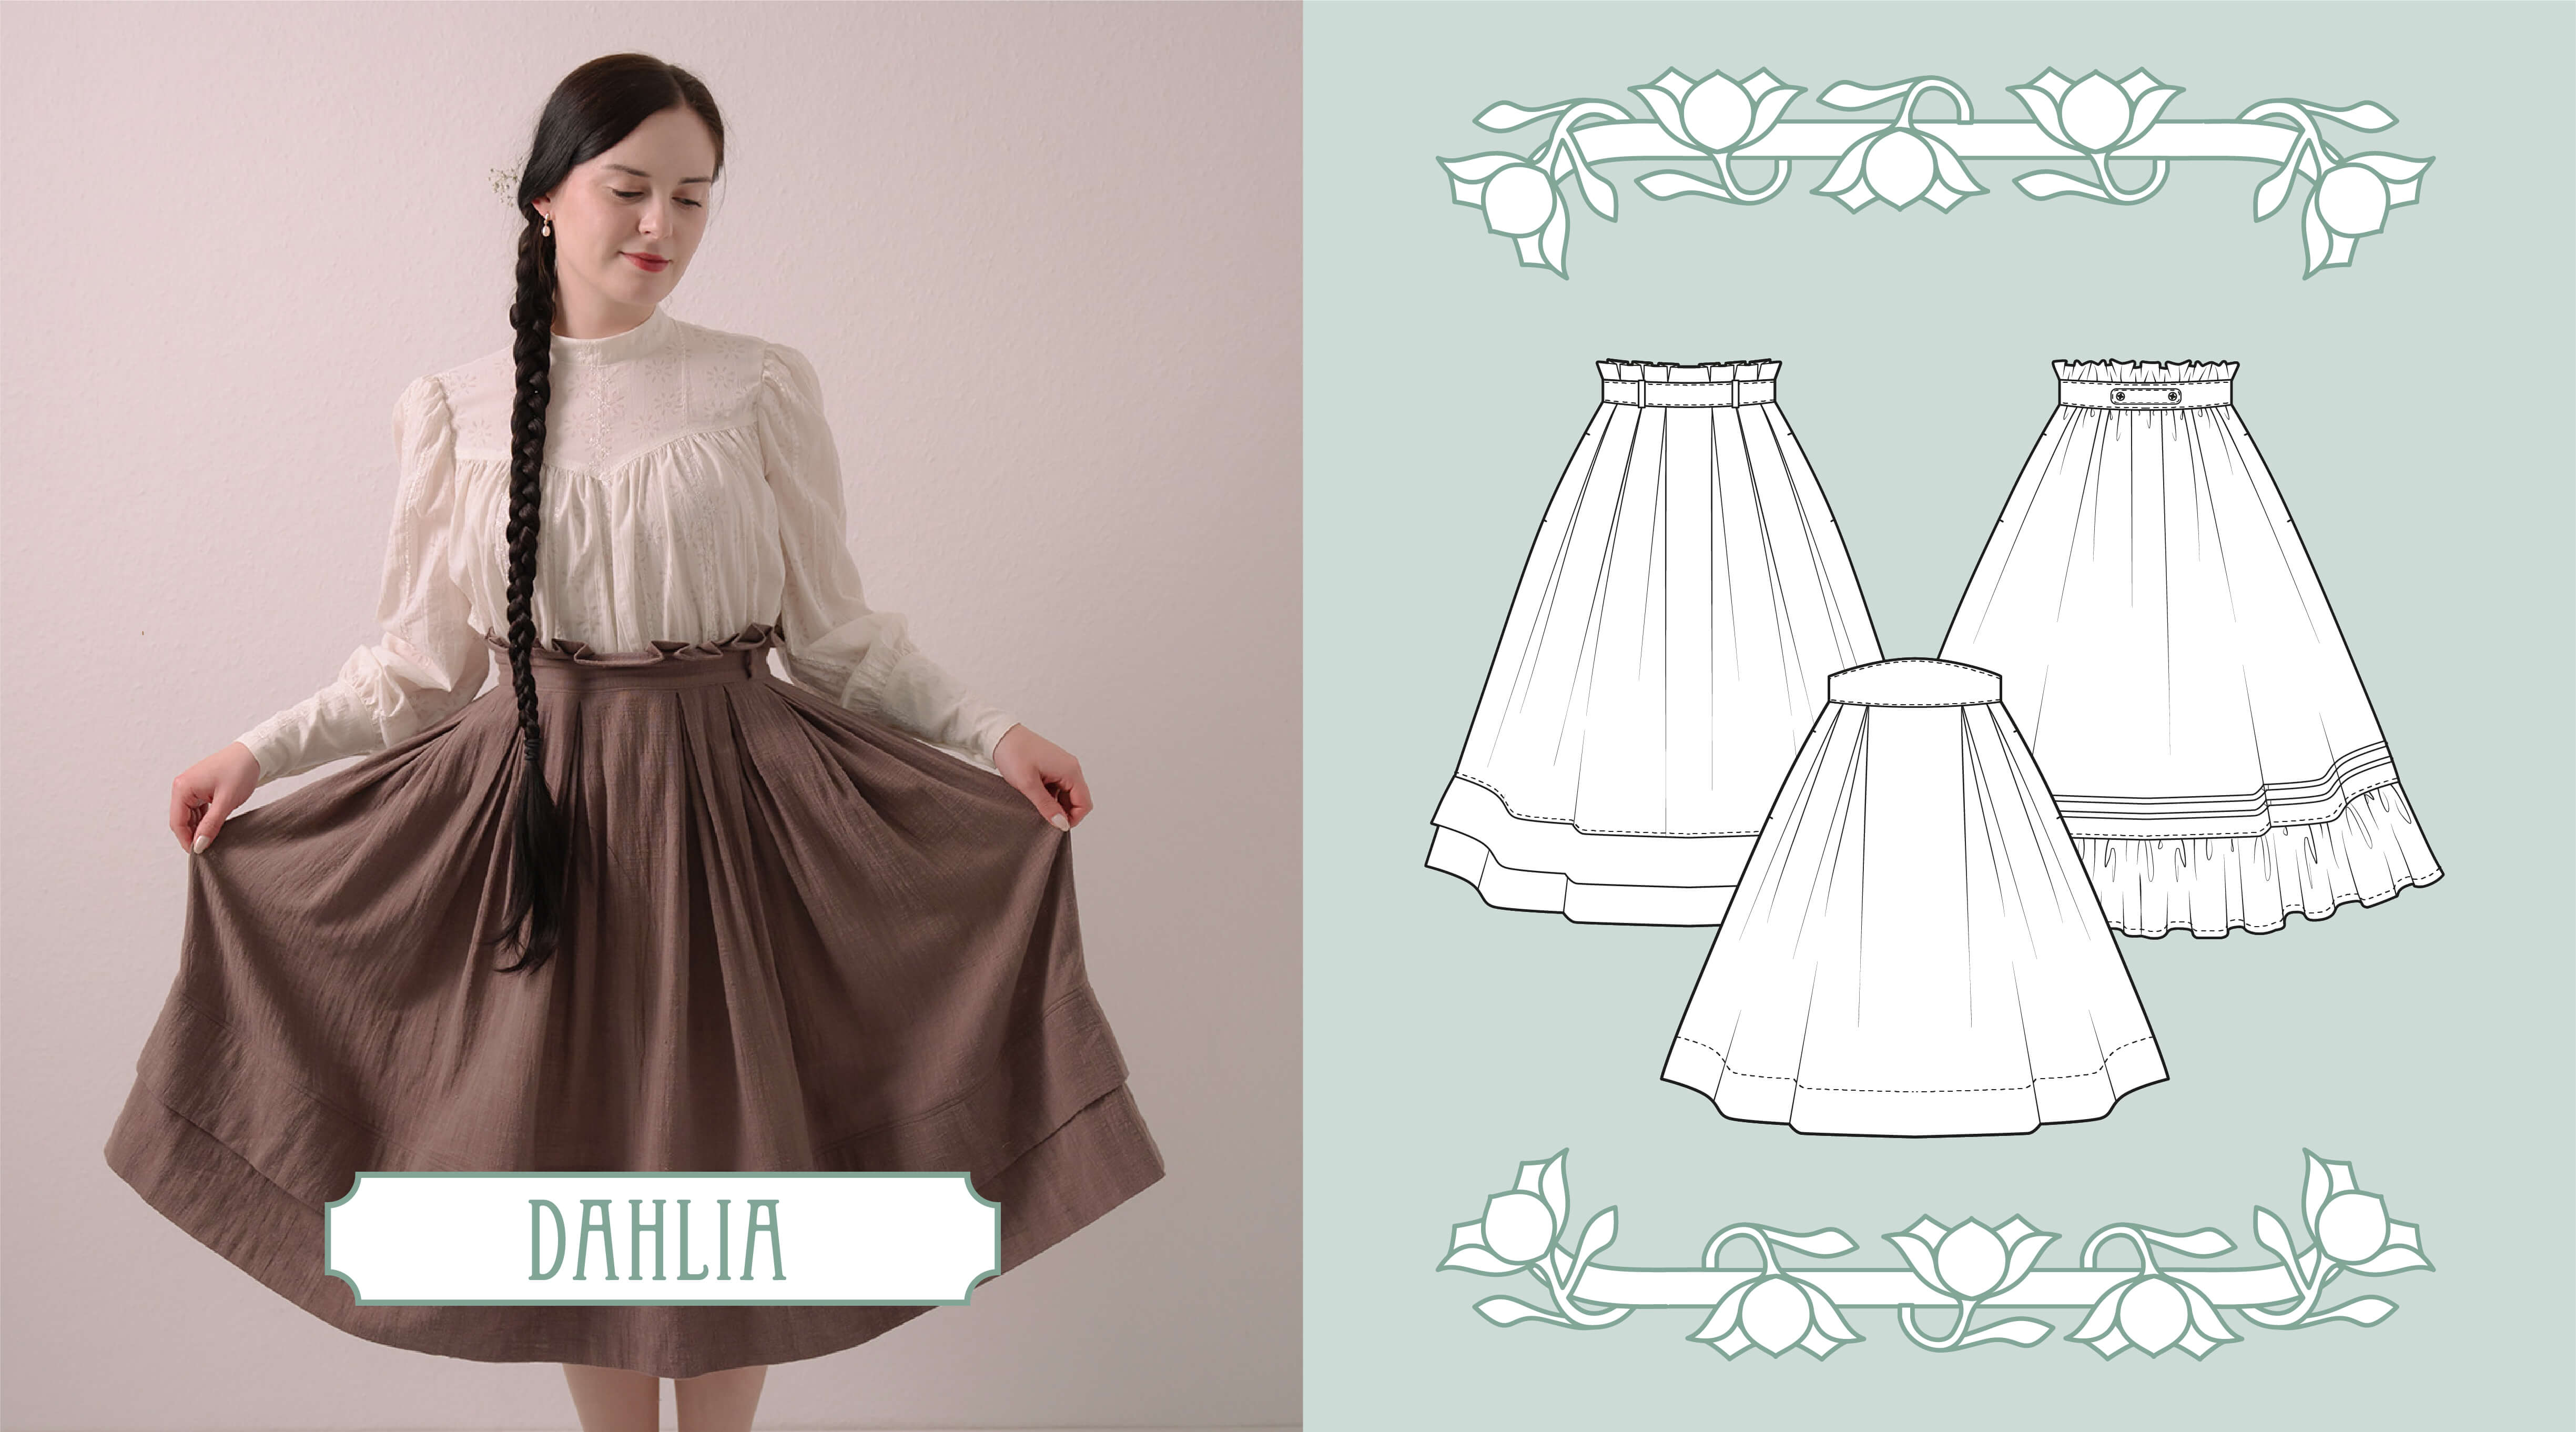 Meet our latest sewing pattern - Dahlia, our wardrobe essential skirt